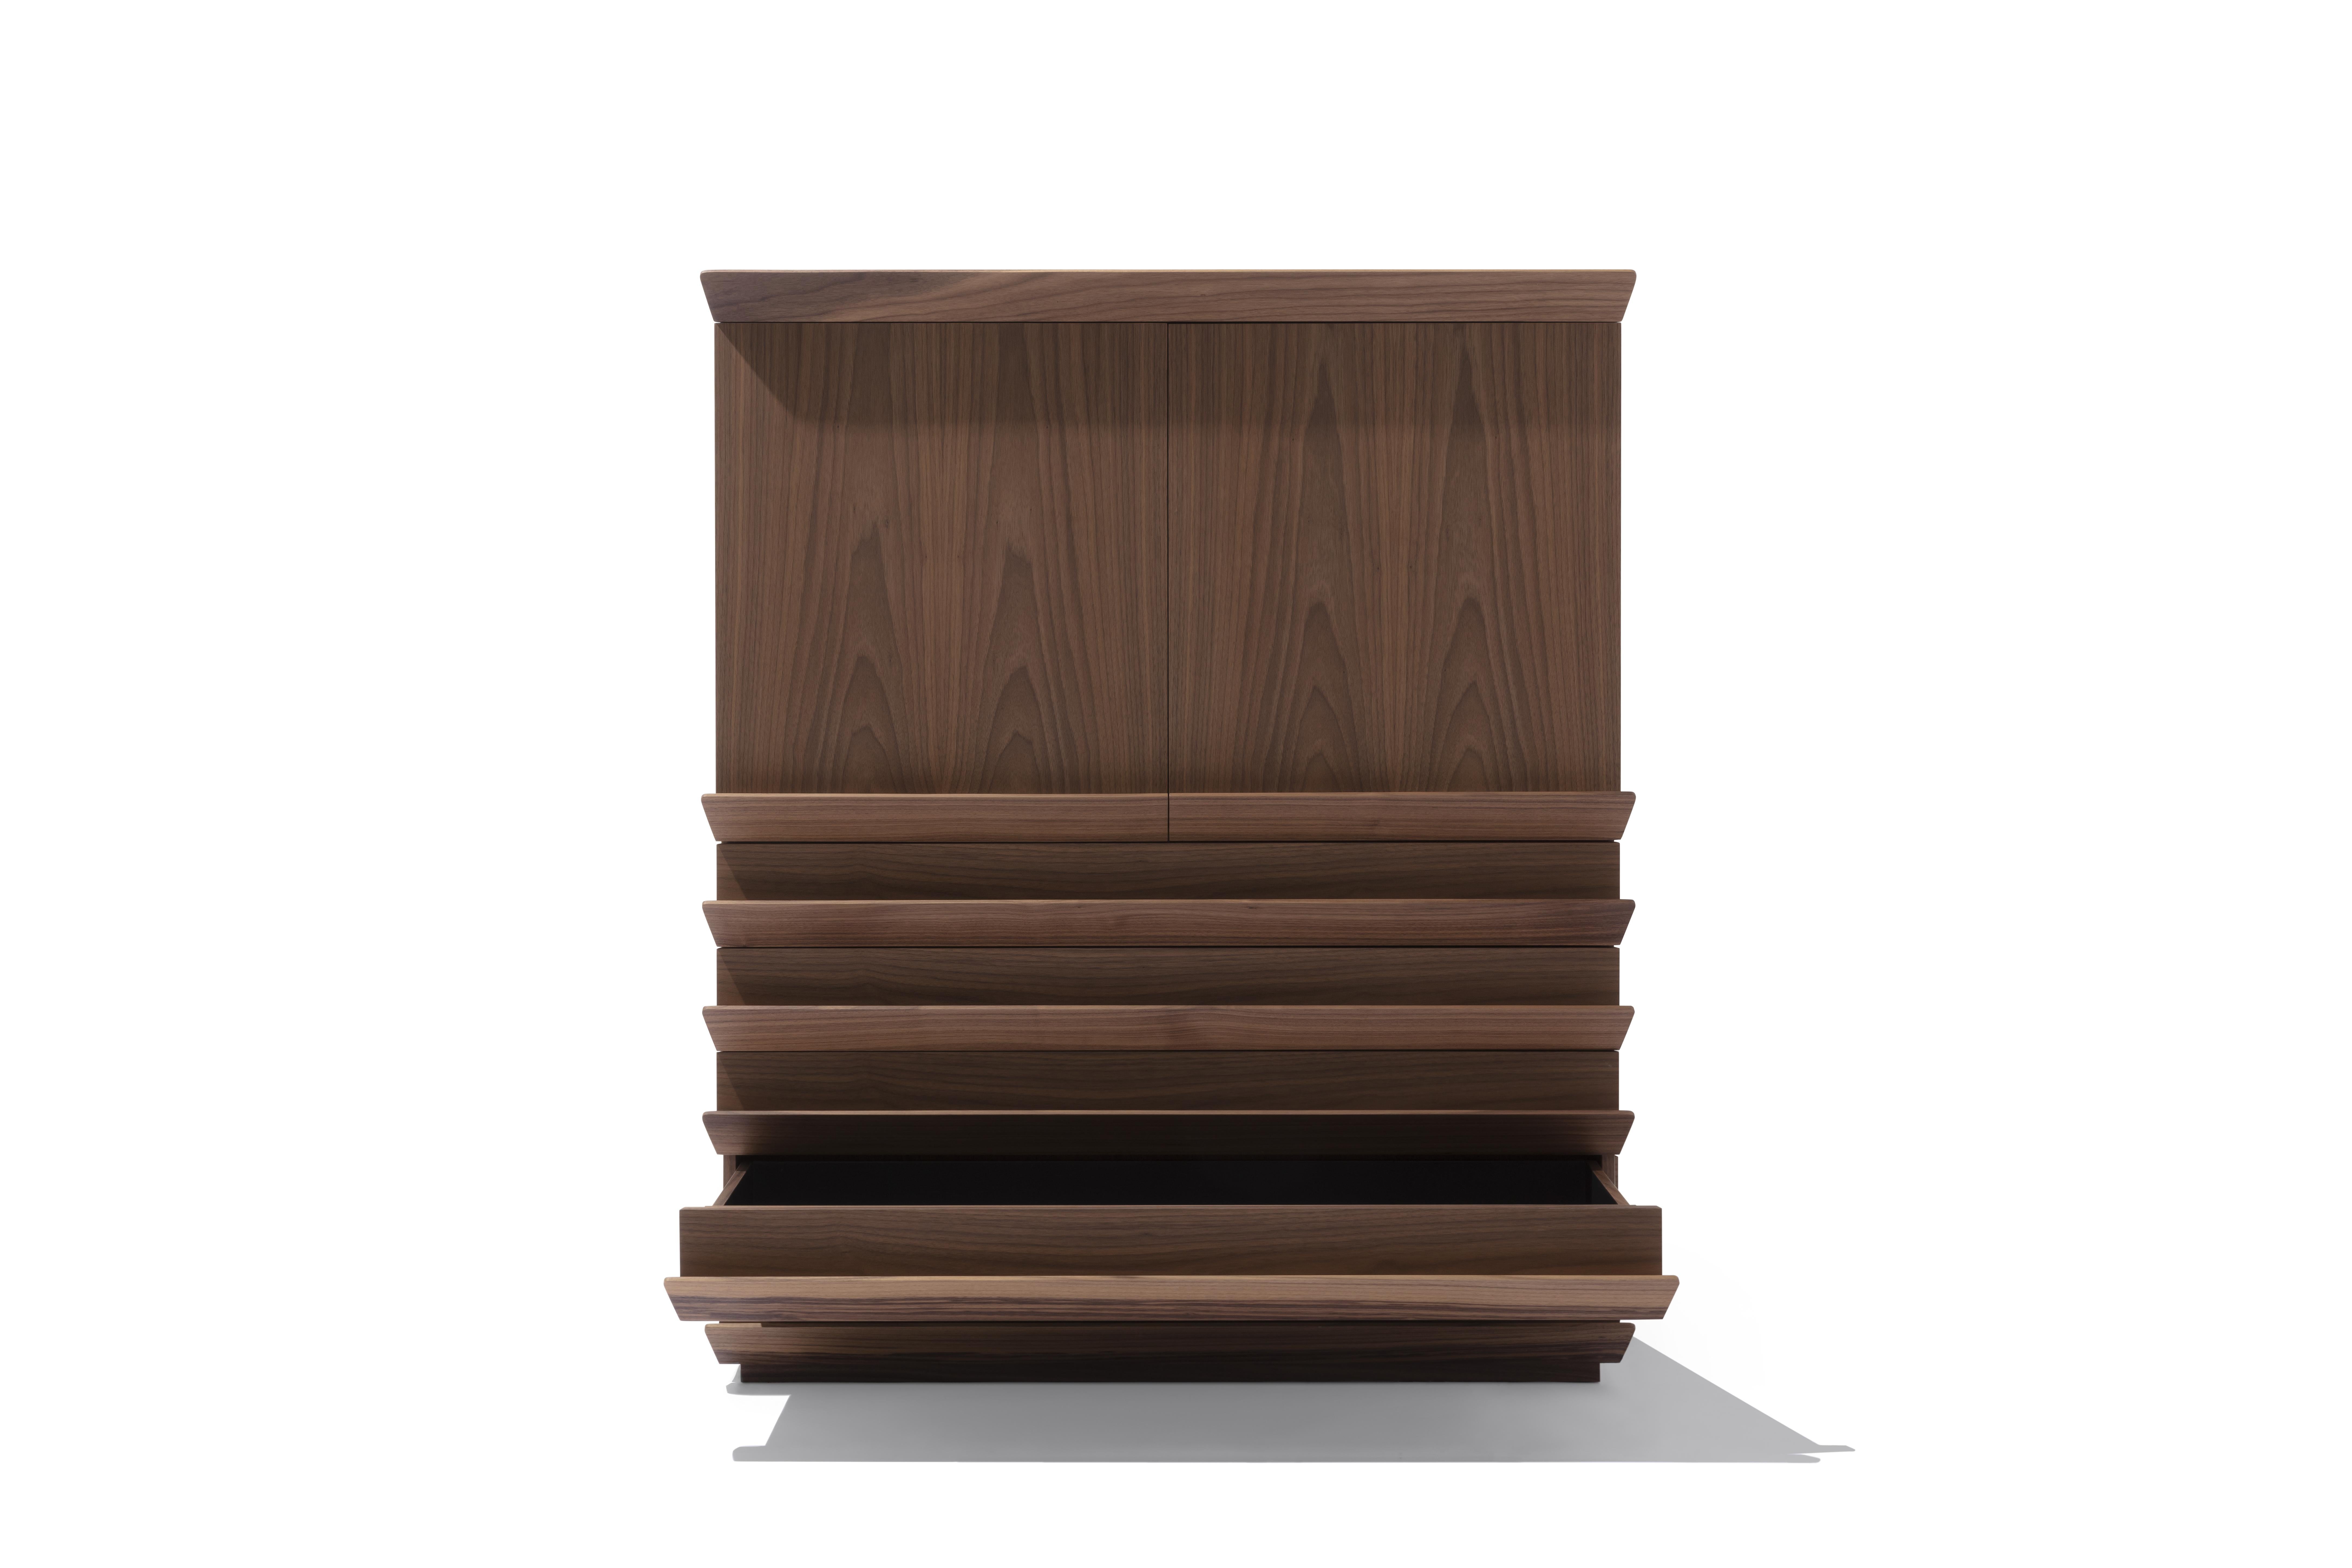 The overlooking large cabinet is characterized by the decisive and discreet presence of wing handles arranged along the entire length of the front of the cabinet, which allow you to easily open drawers or cabinet doors. Each element of the